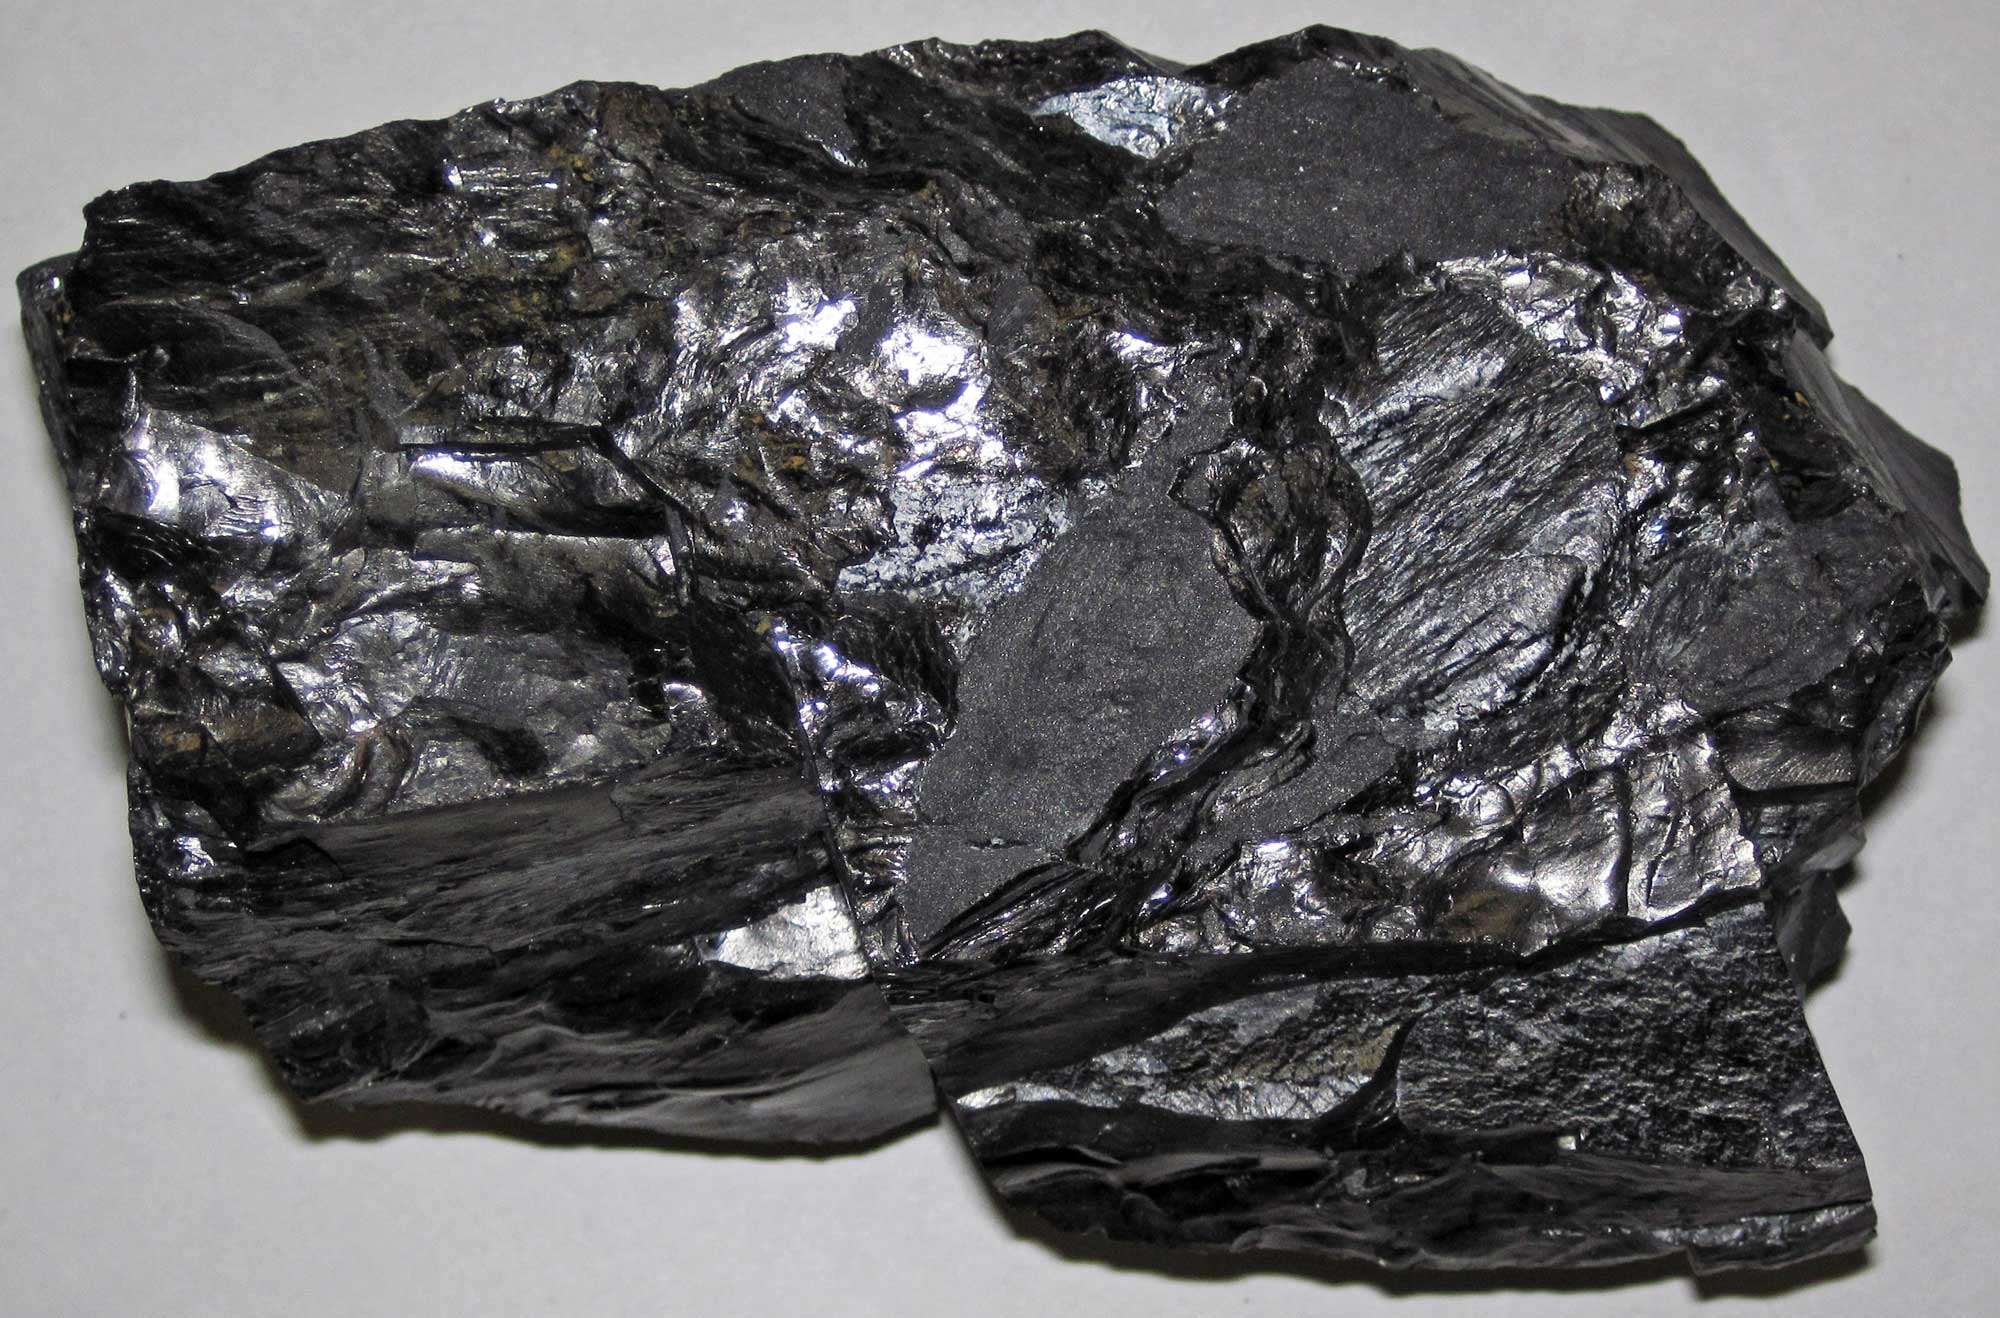 Photograph of a chunk of anthracite coal. The chunk of coal is roughly rectangular, shiny, and black.